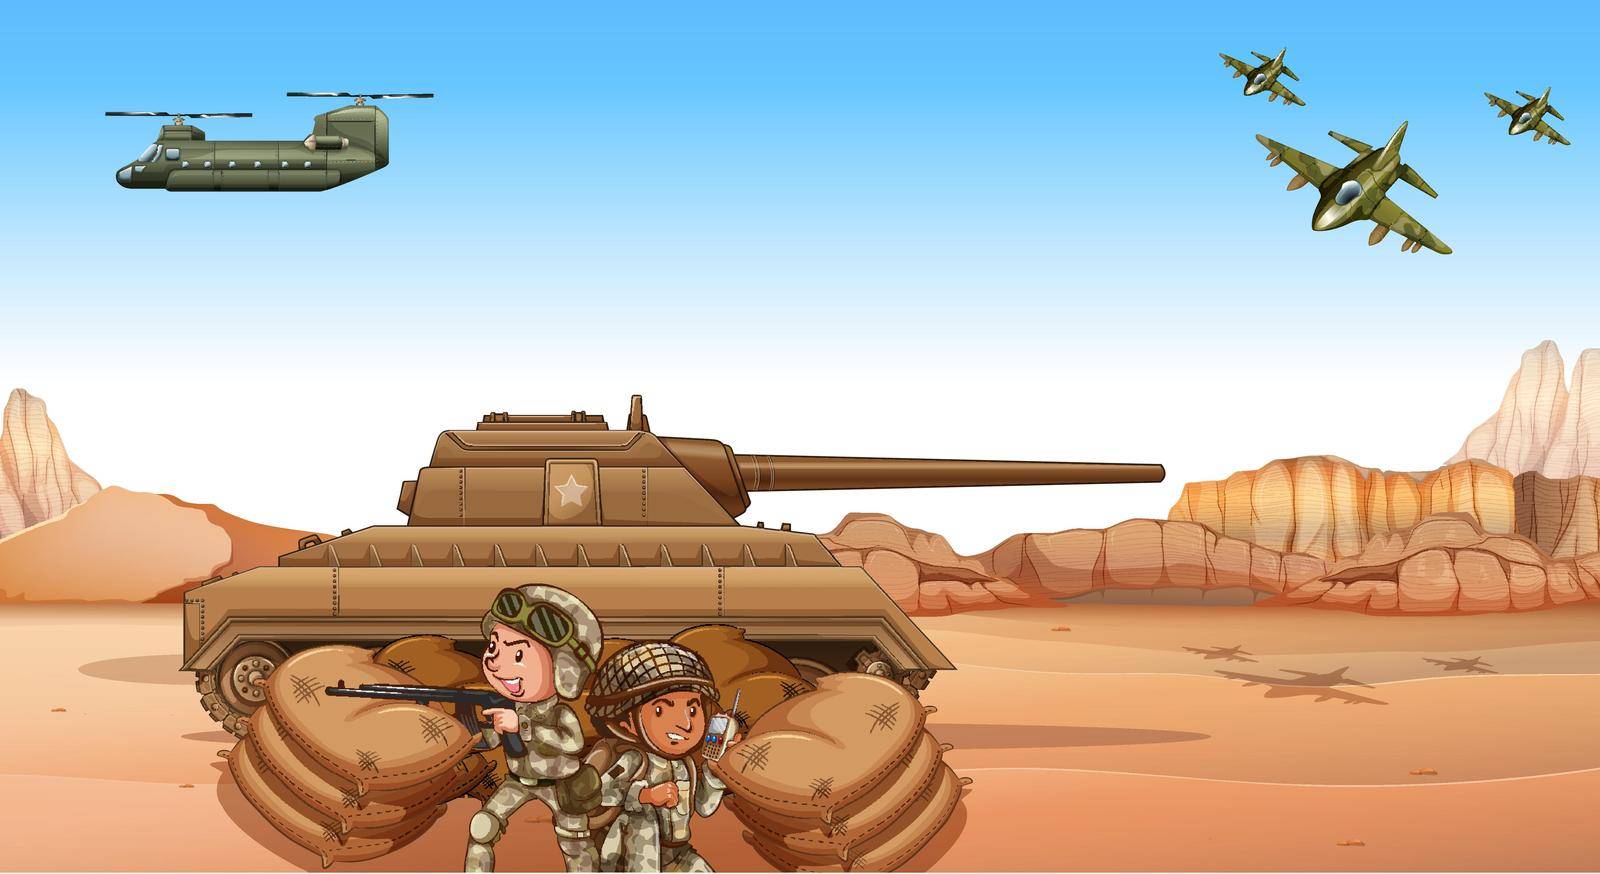 Soldiers fighting in the battle field by the tank